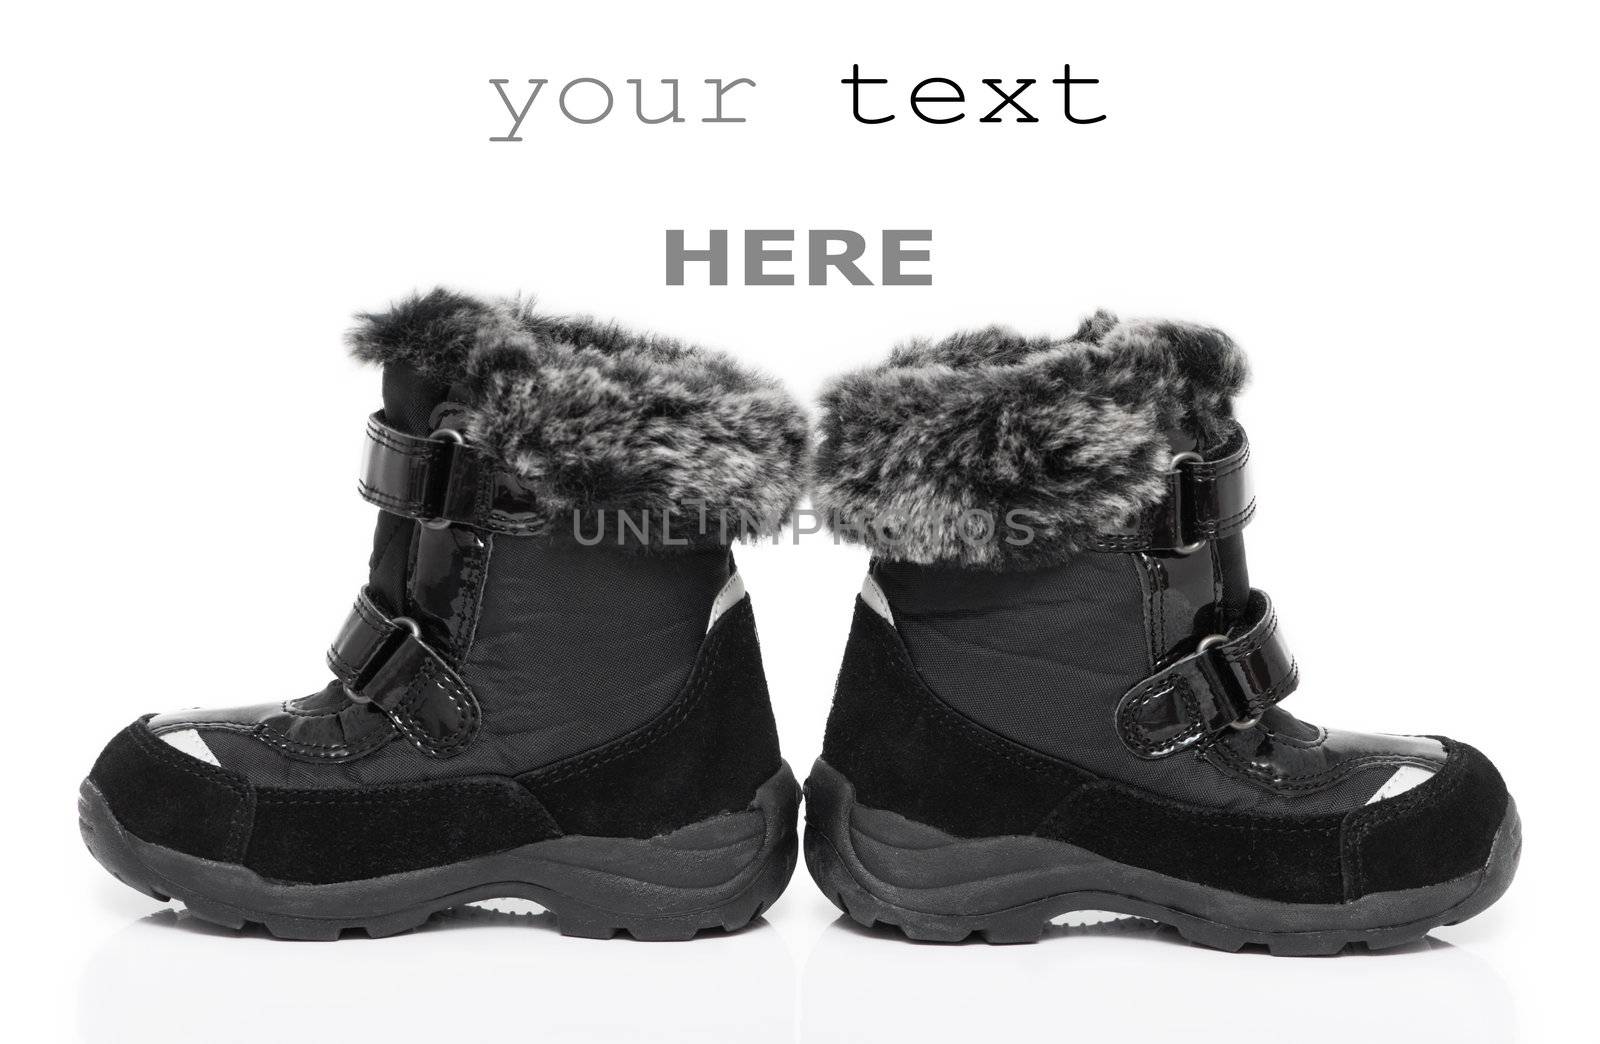 Black child's winter boots isolated on white background (with space for text)